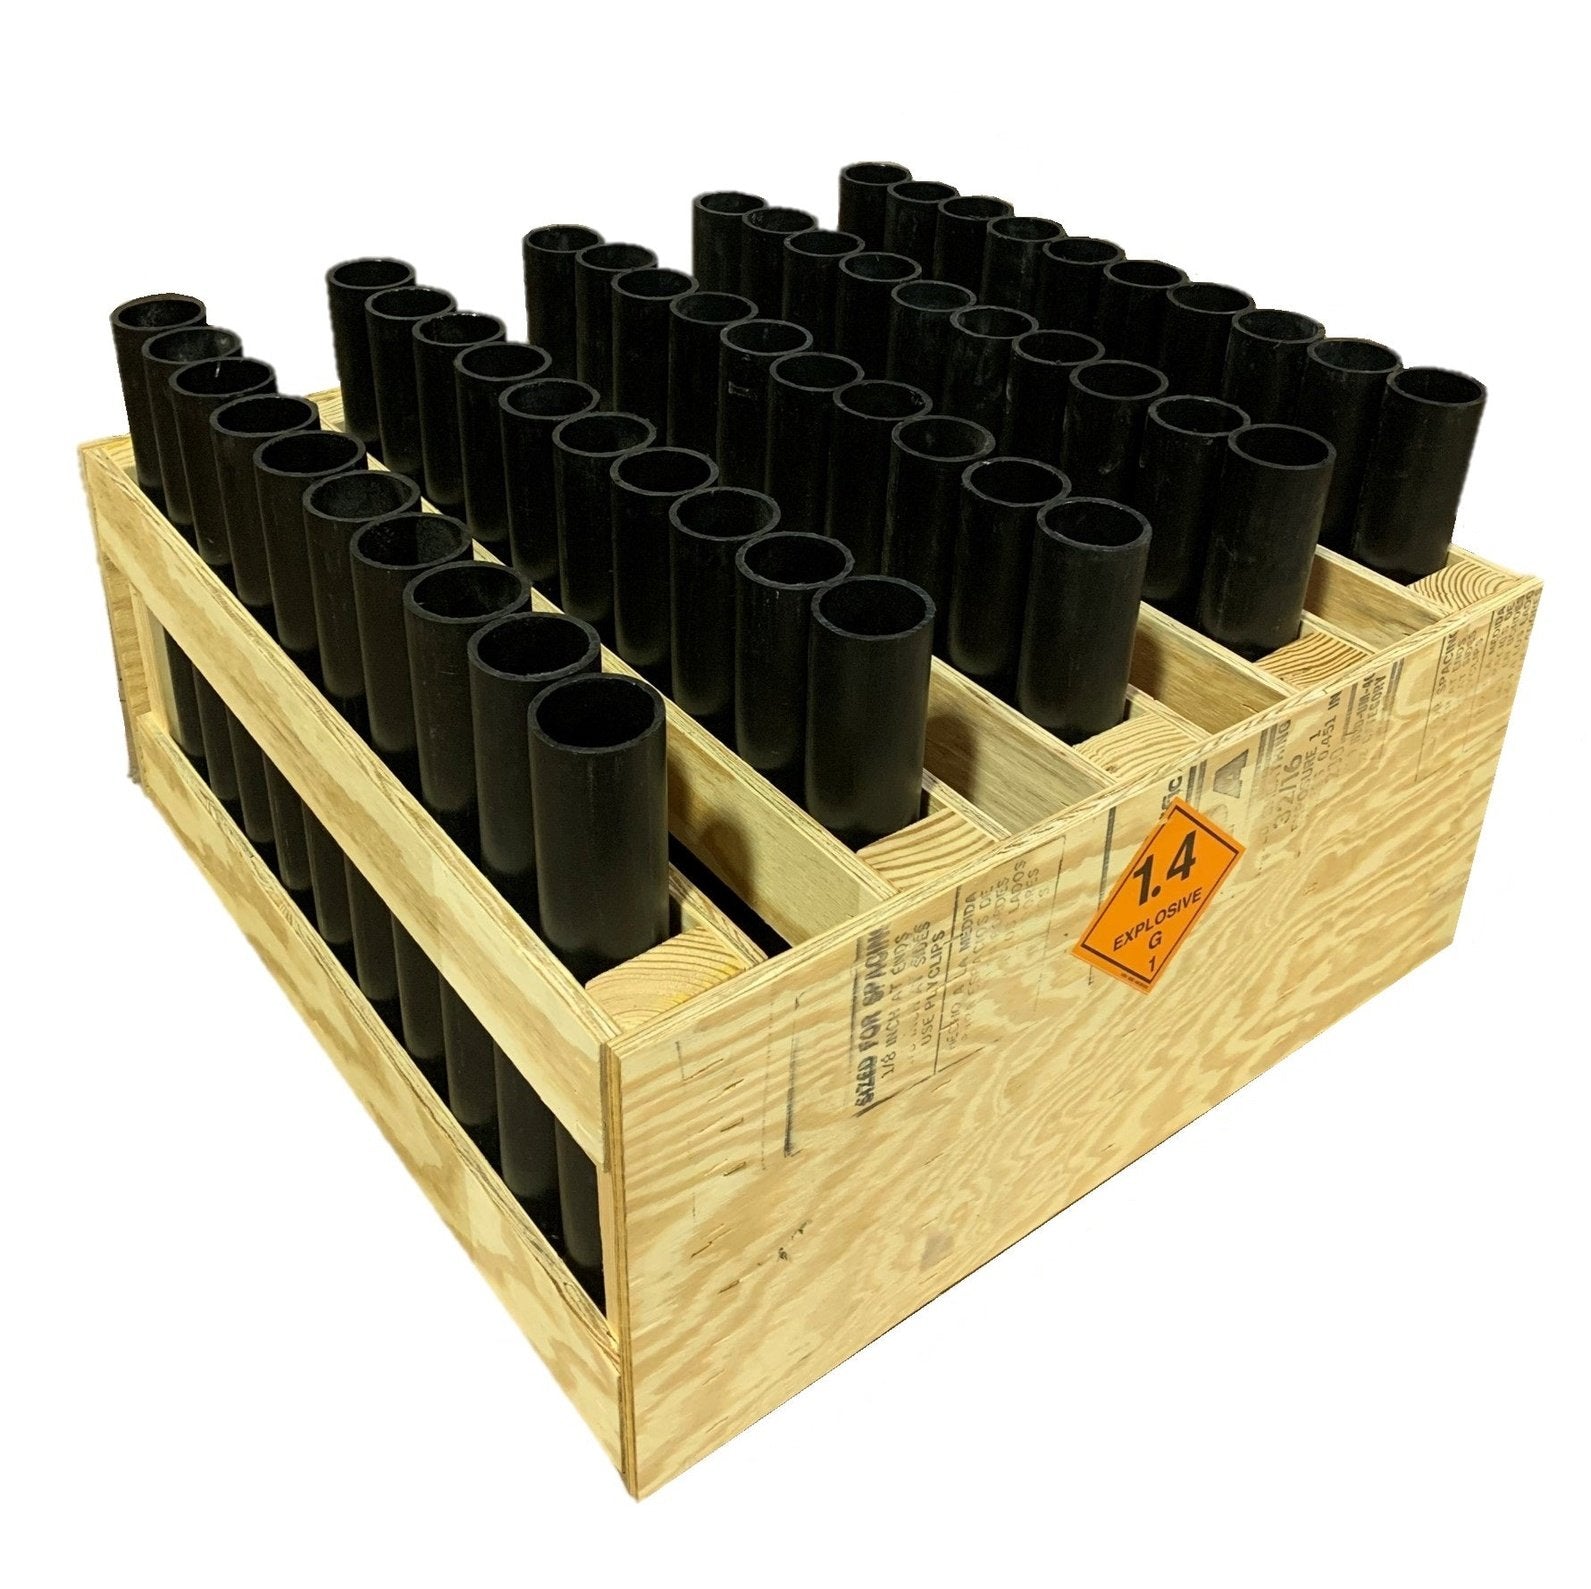 50 Shot Rack Straight with 15" DR17 Mortars